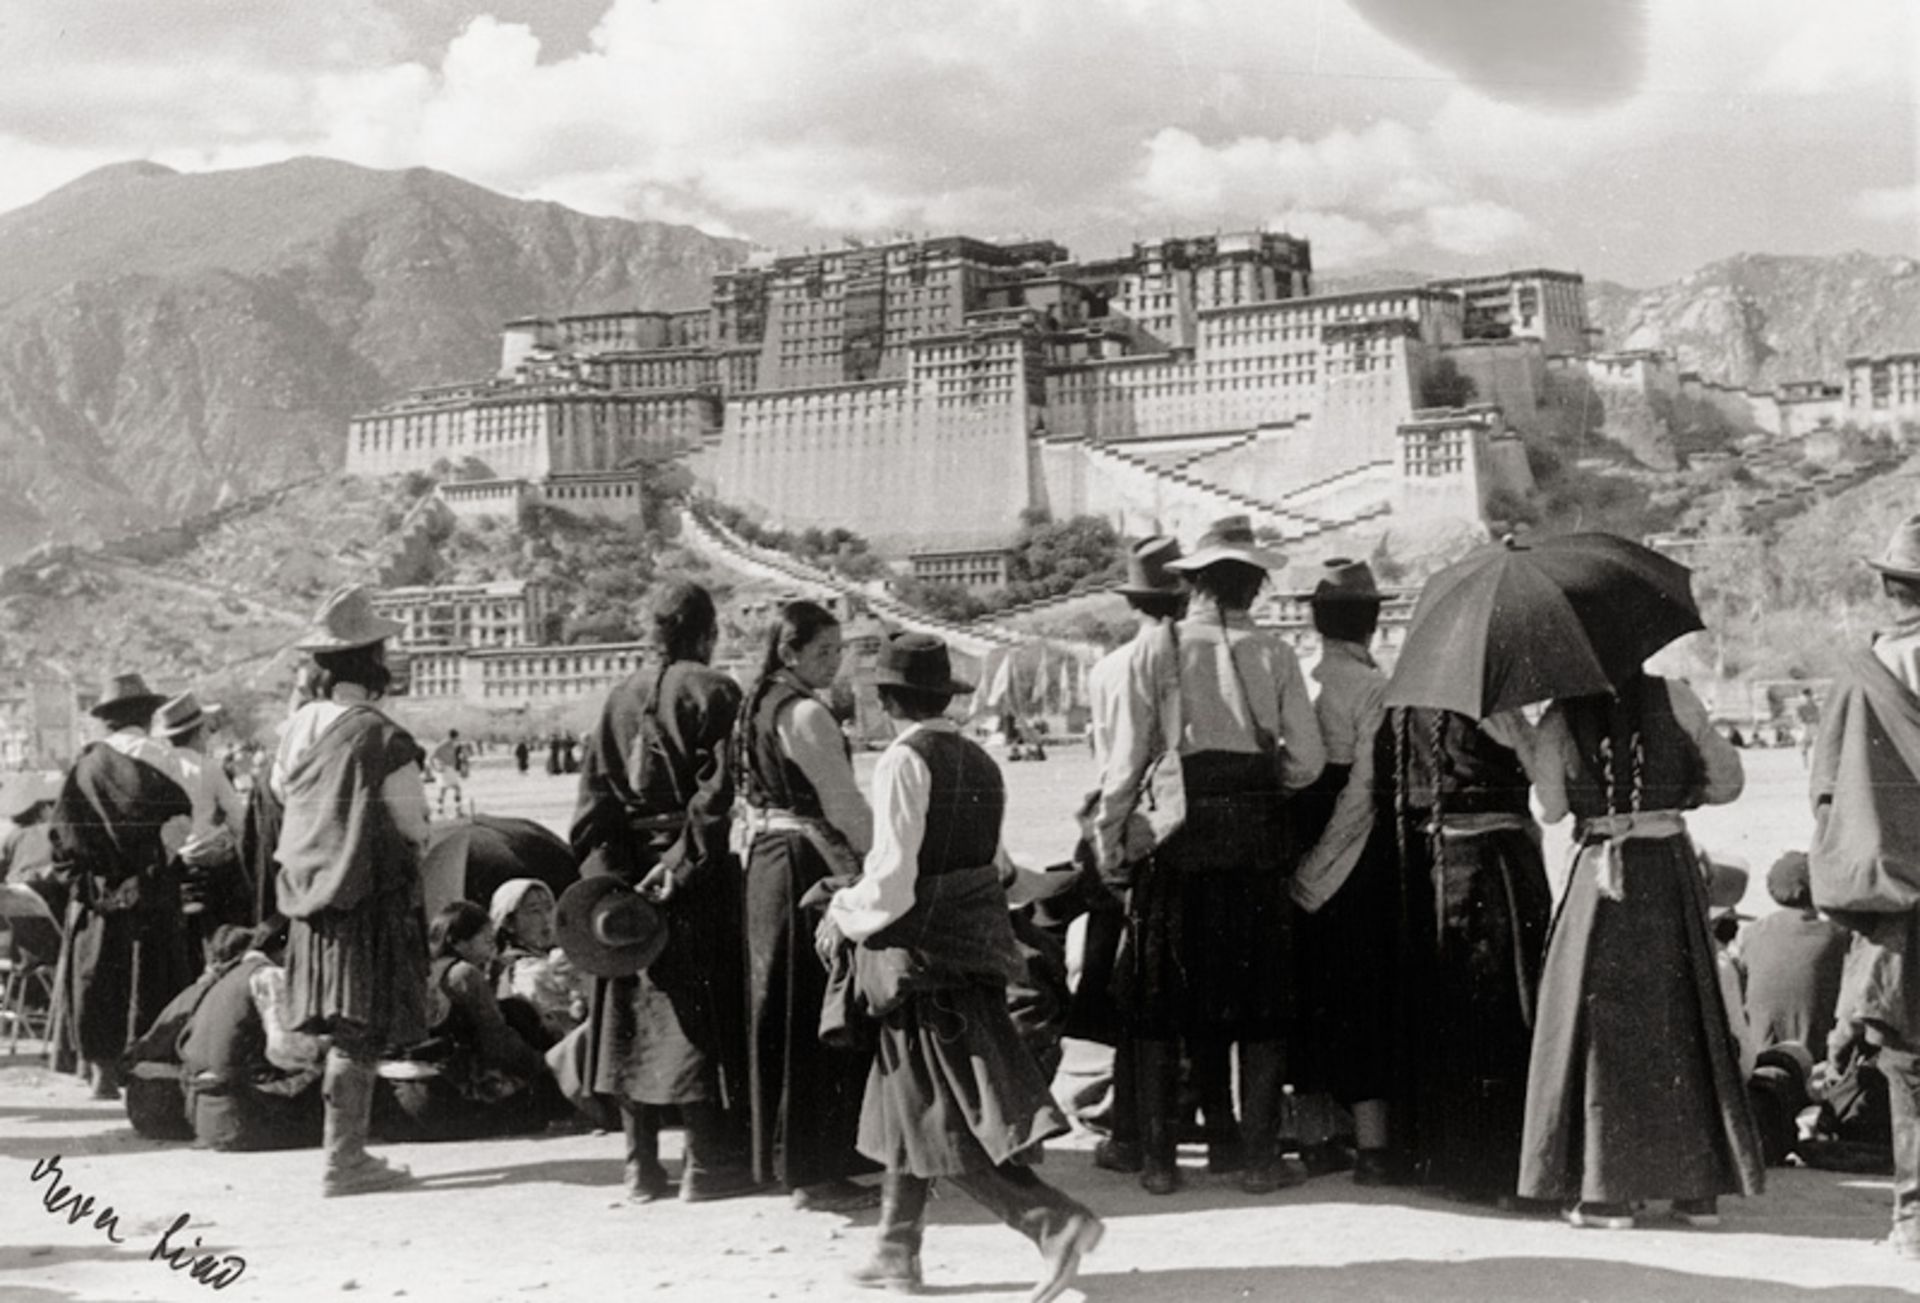 Siao, Eva: Images of Lhasa and the Potala Palace